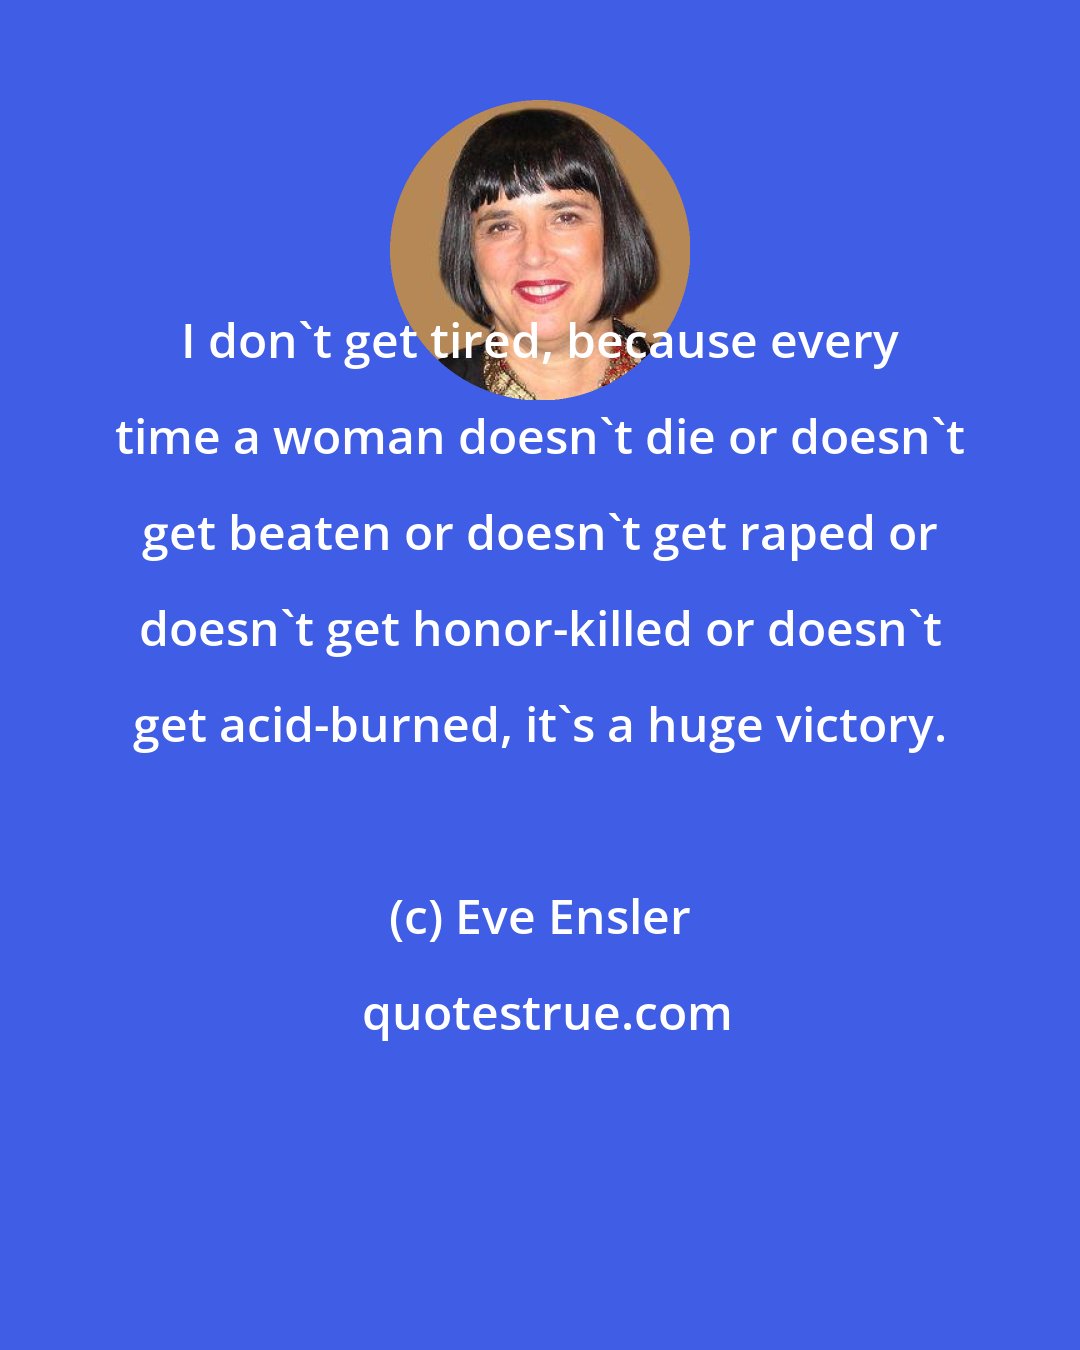 Eve Ensler: I don't get tired, because every time a woman doesn't die or doesn't get beaten or doesn't get raped or doesn't get honor-killed or doesn't get acid-burned, it's a huge victory.